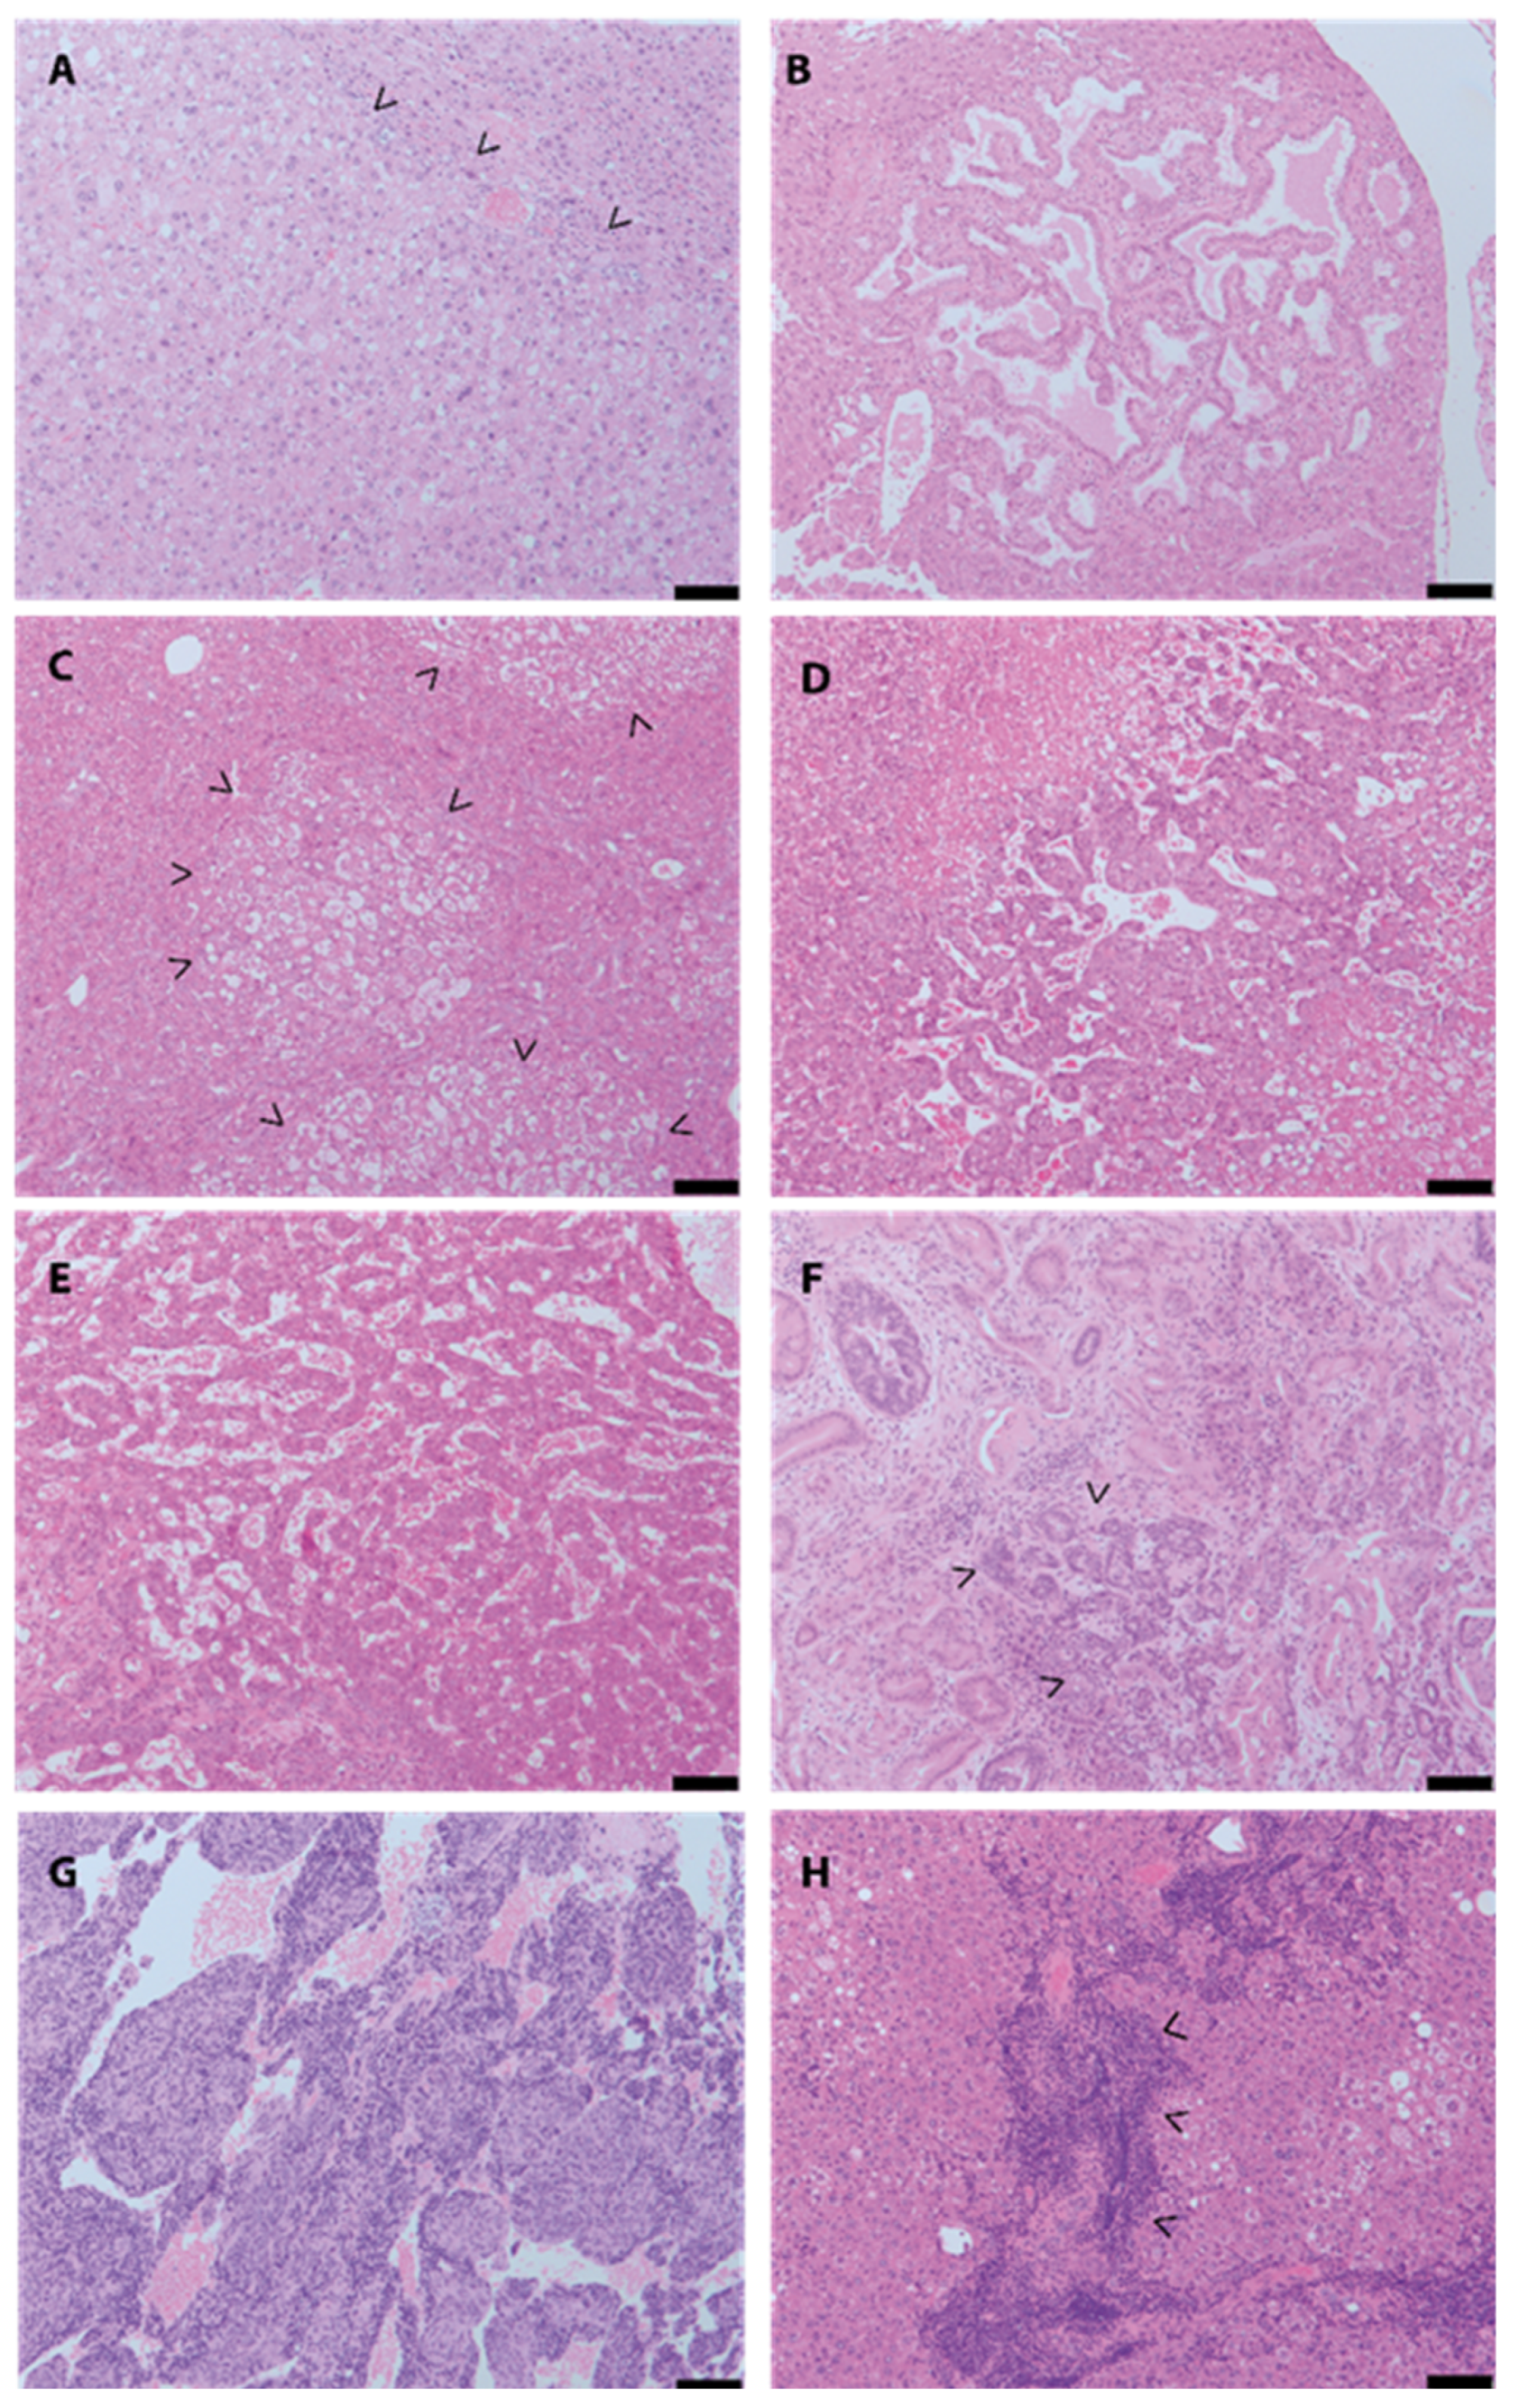 Cancers | Free Full-Text | Genetically Engineered Mouse Models of Liver  Tumorigenesis Reveal a Wide Histological Spectrum of Neoplastic and Non- Neoplastic Liver Lesions